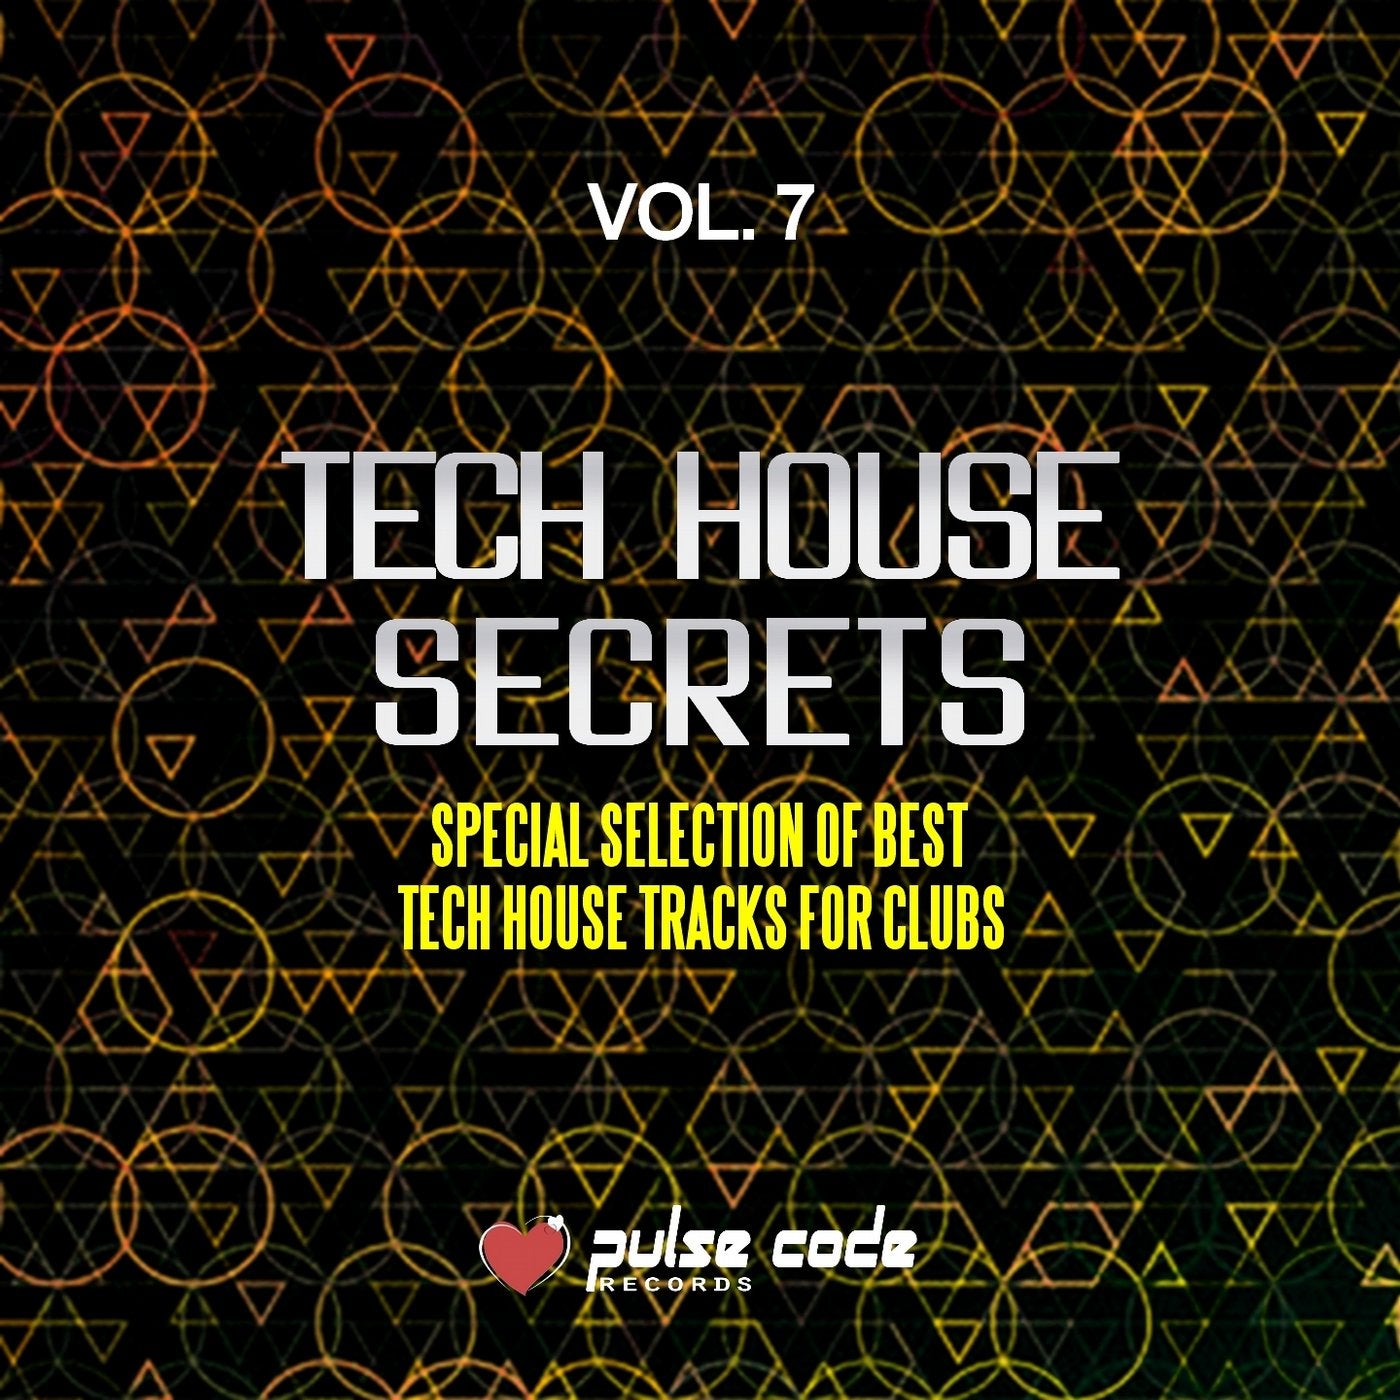 Tech House Secrets, Vol. 7 (Special Selection of Best Tech House Tracks for Clubs)